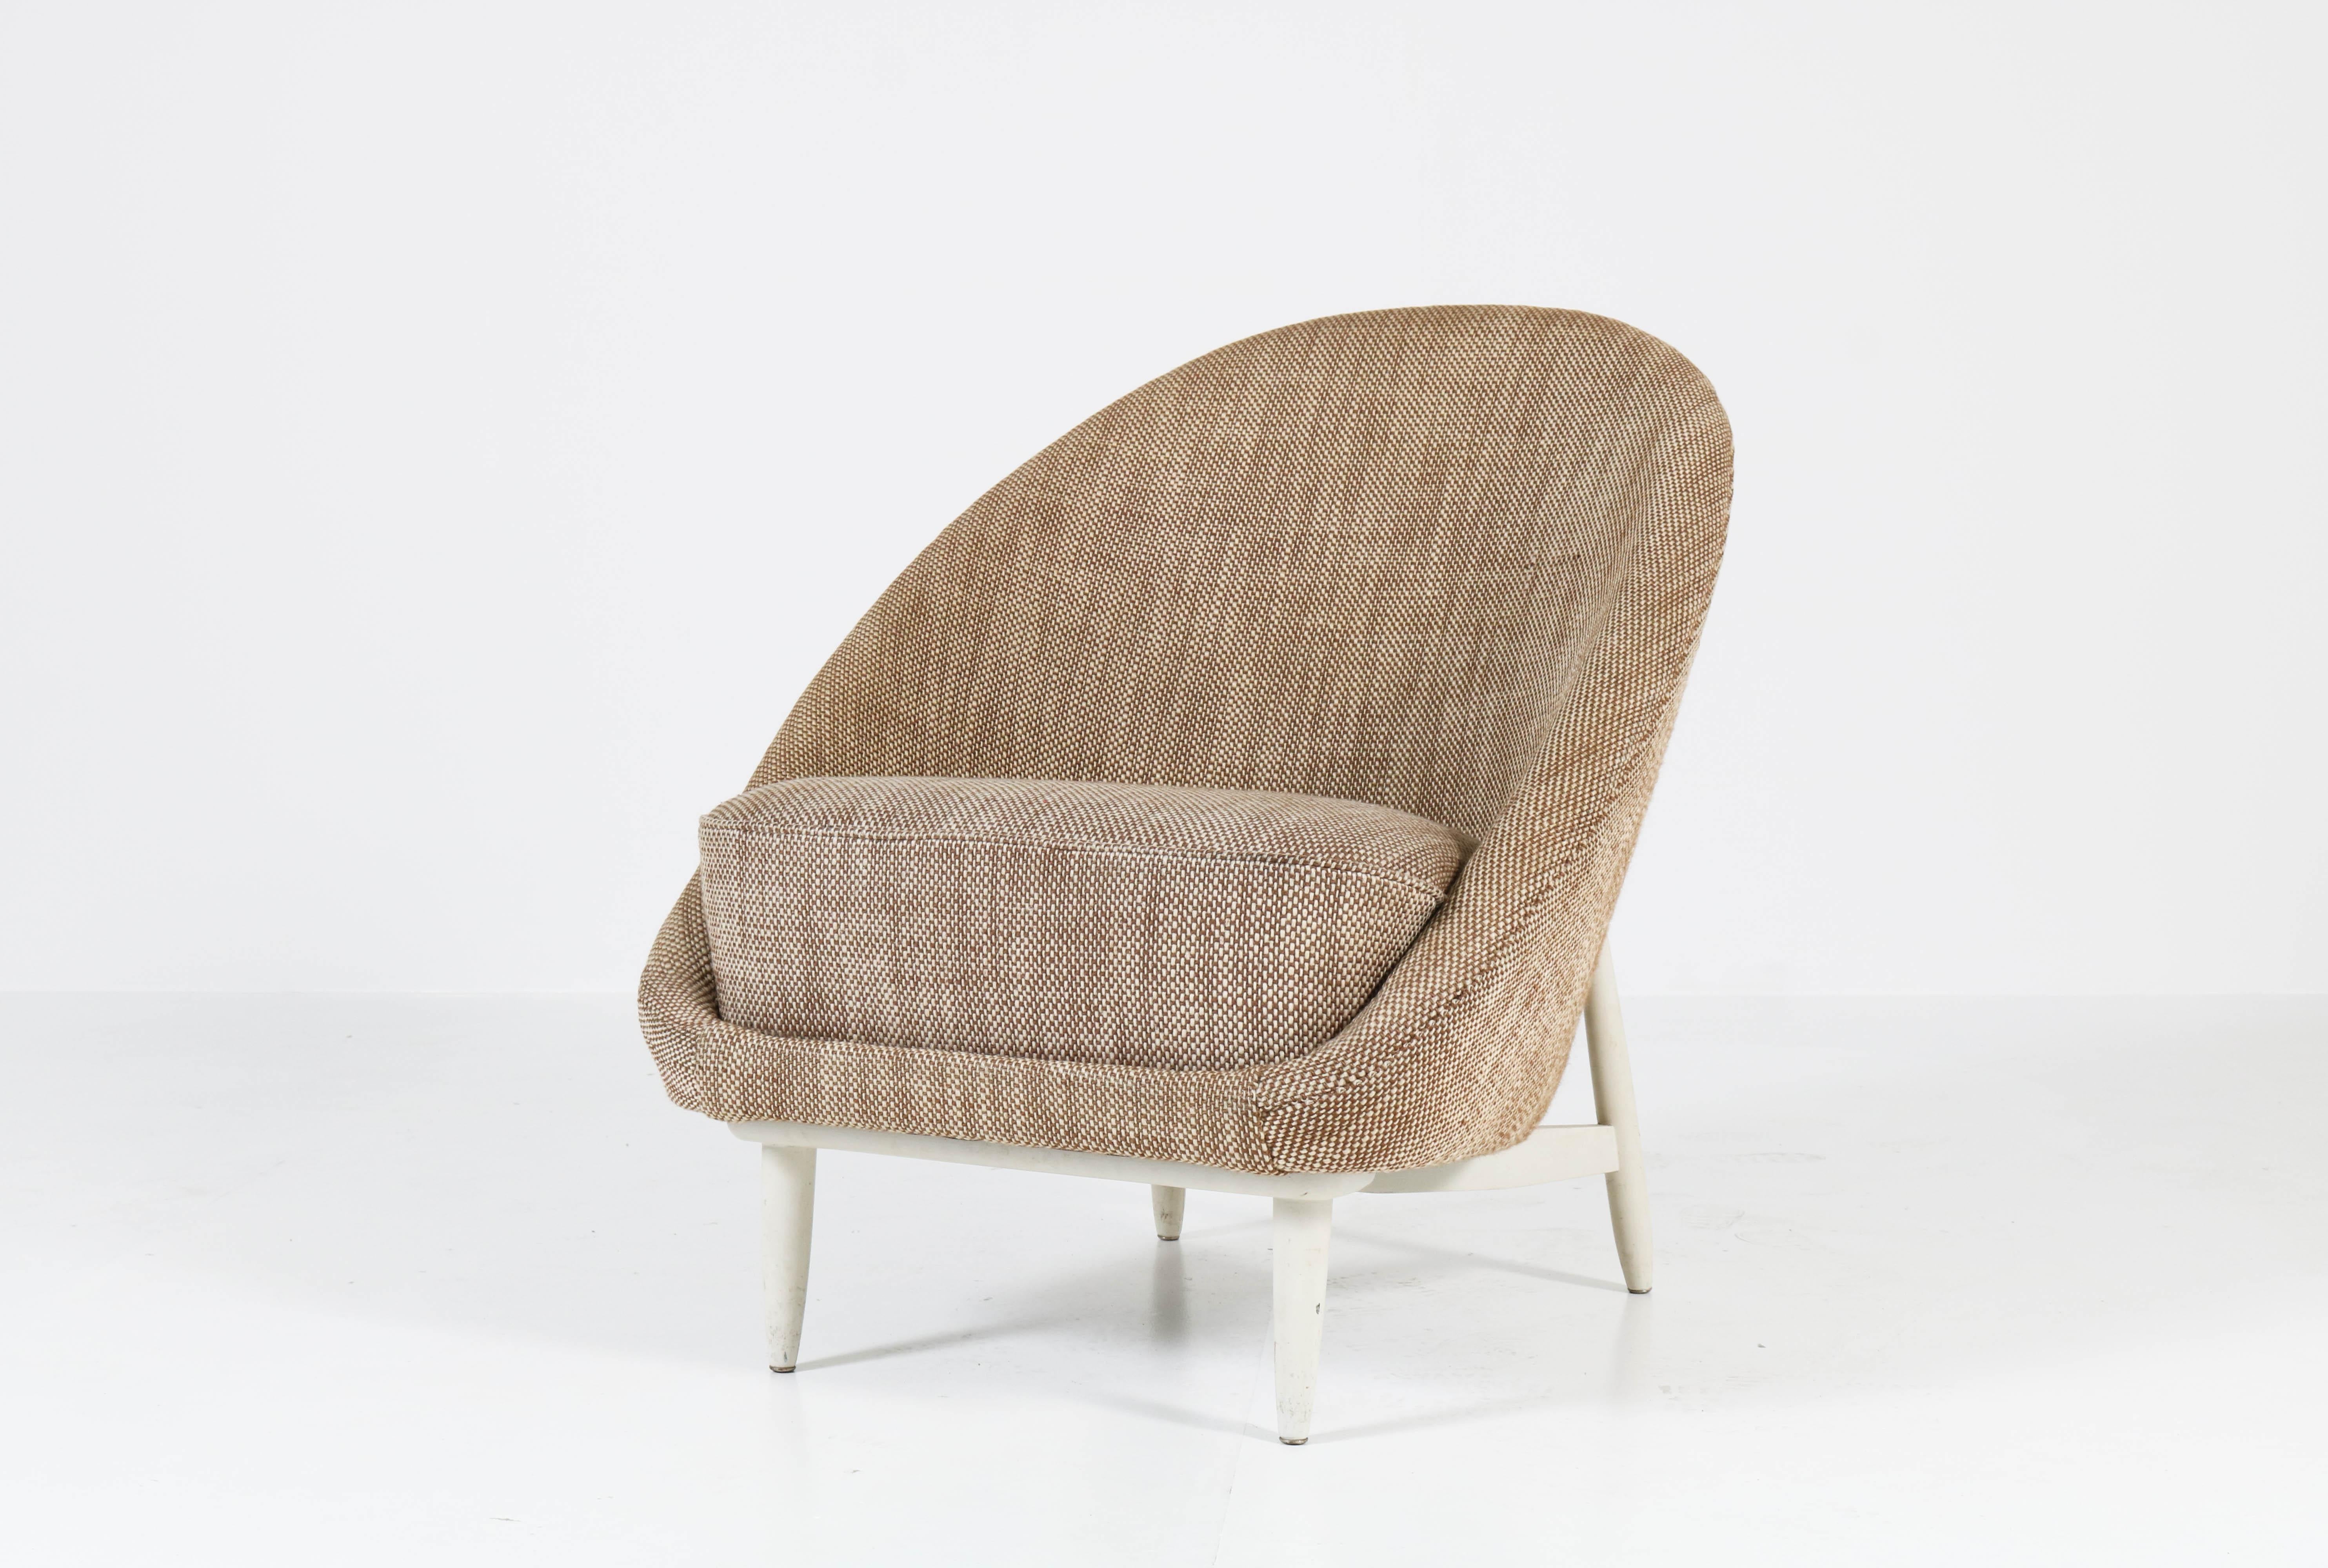 Wonderful and rare Mid-Century Modern model 115 lounge chair.
Design by Theo Ruth for Artifort.
Striking Dutch design from the 1950s.
White lacquered beech frame with original light brown upholstery.
In good original condition with minor wear